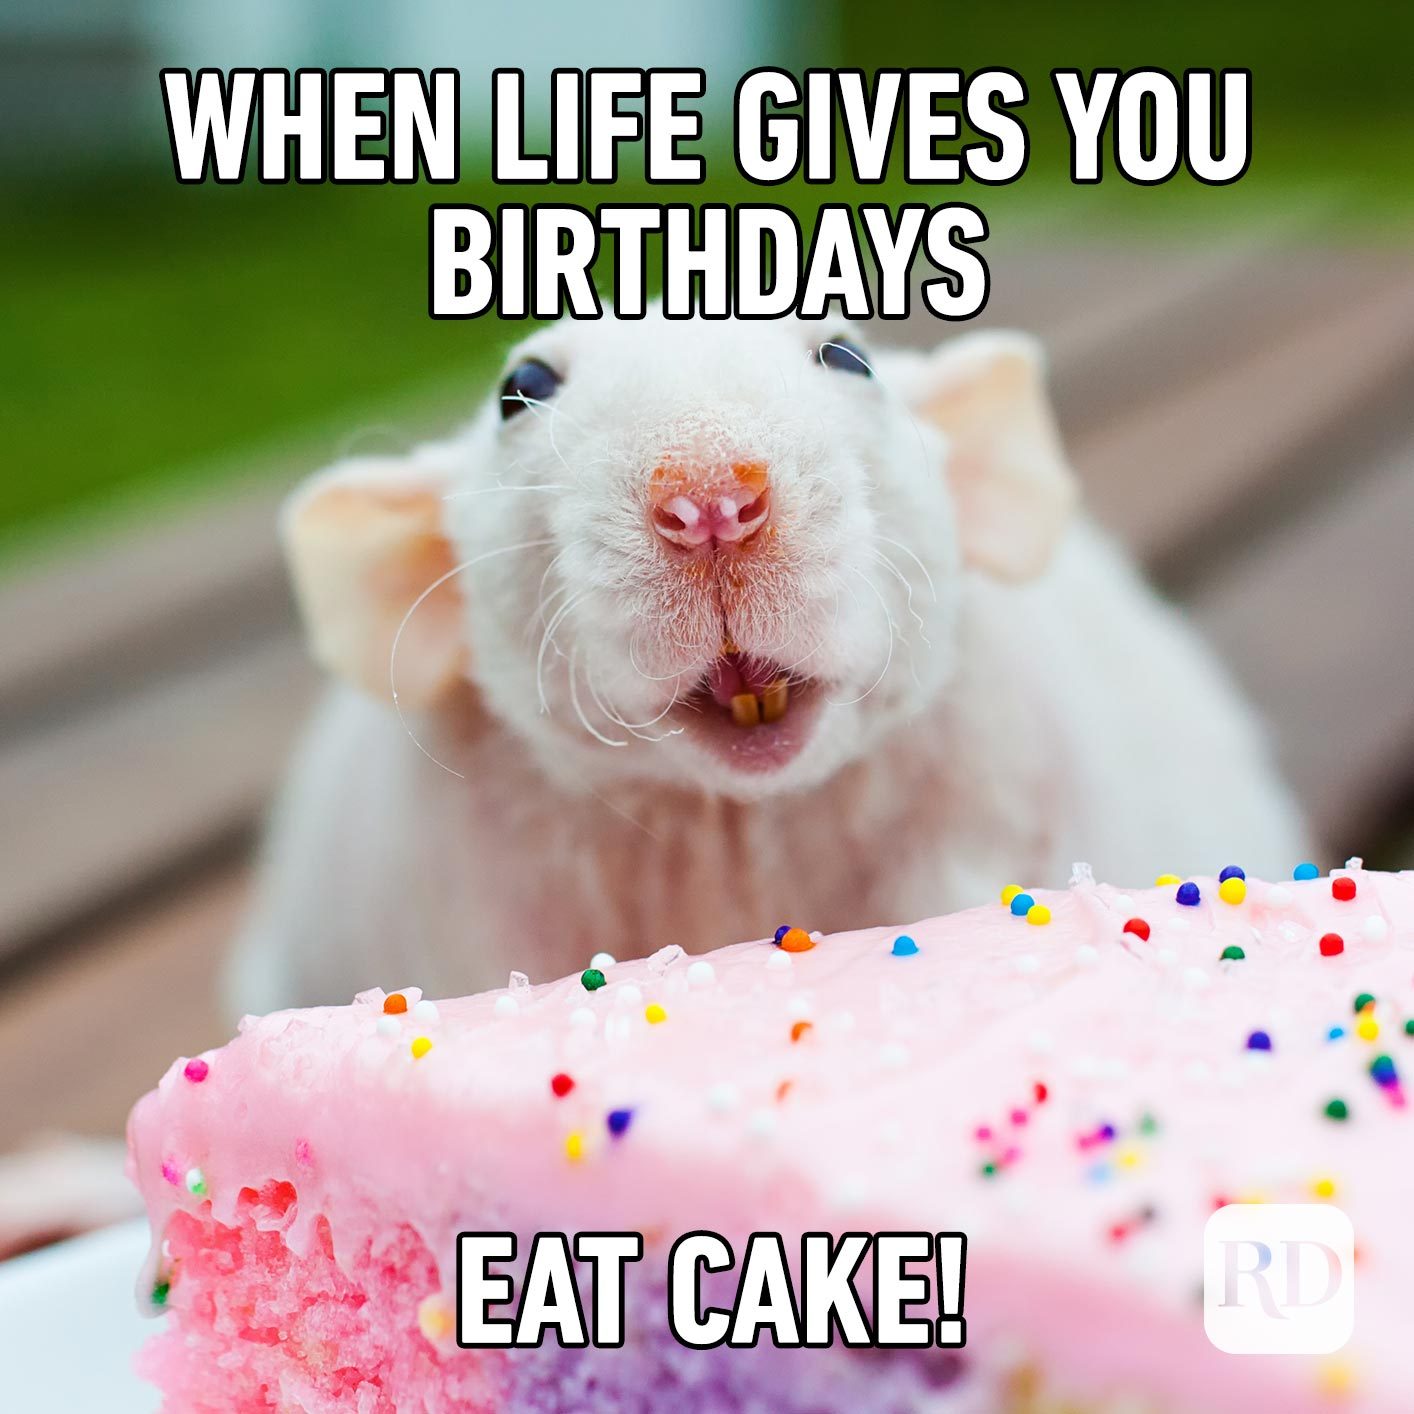 When life gives you birthdays, eat cake!